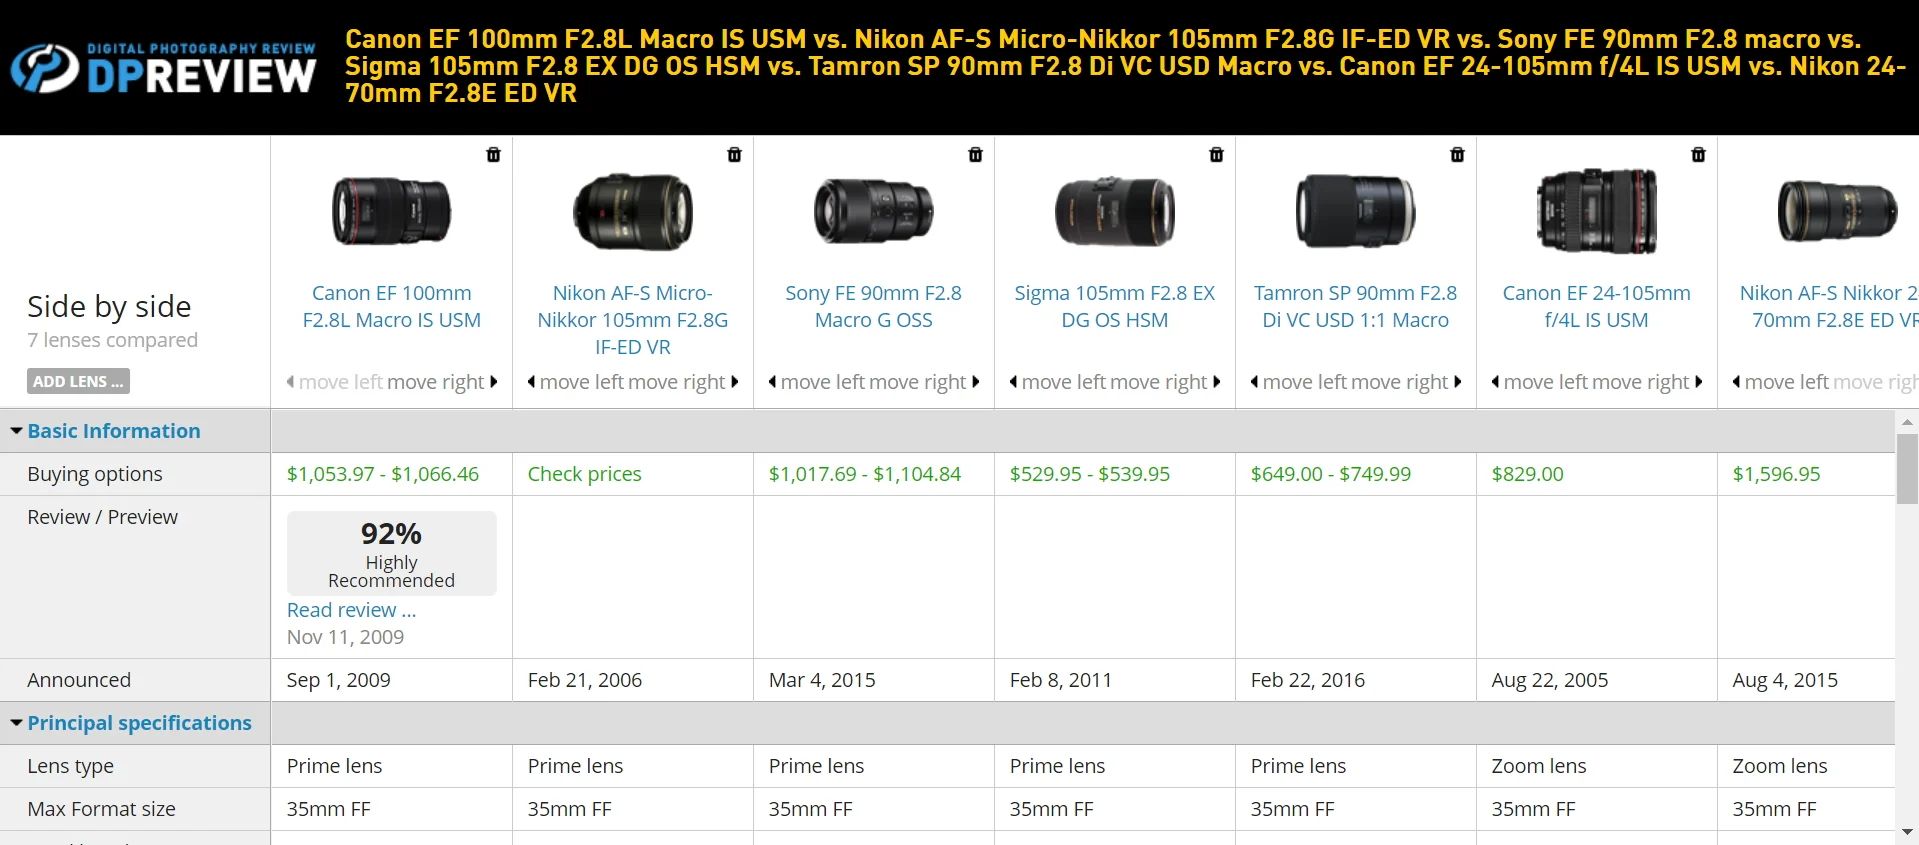 Recommended lenses for product photography